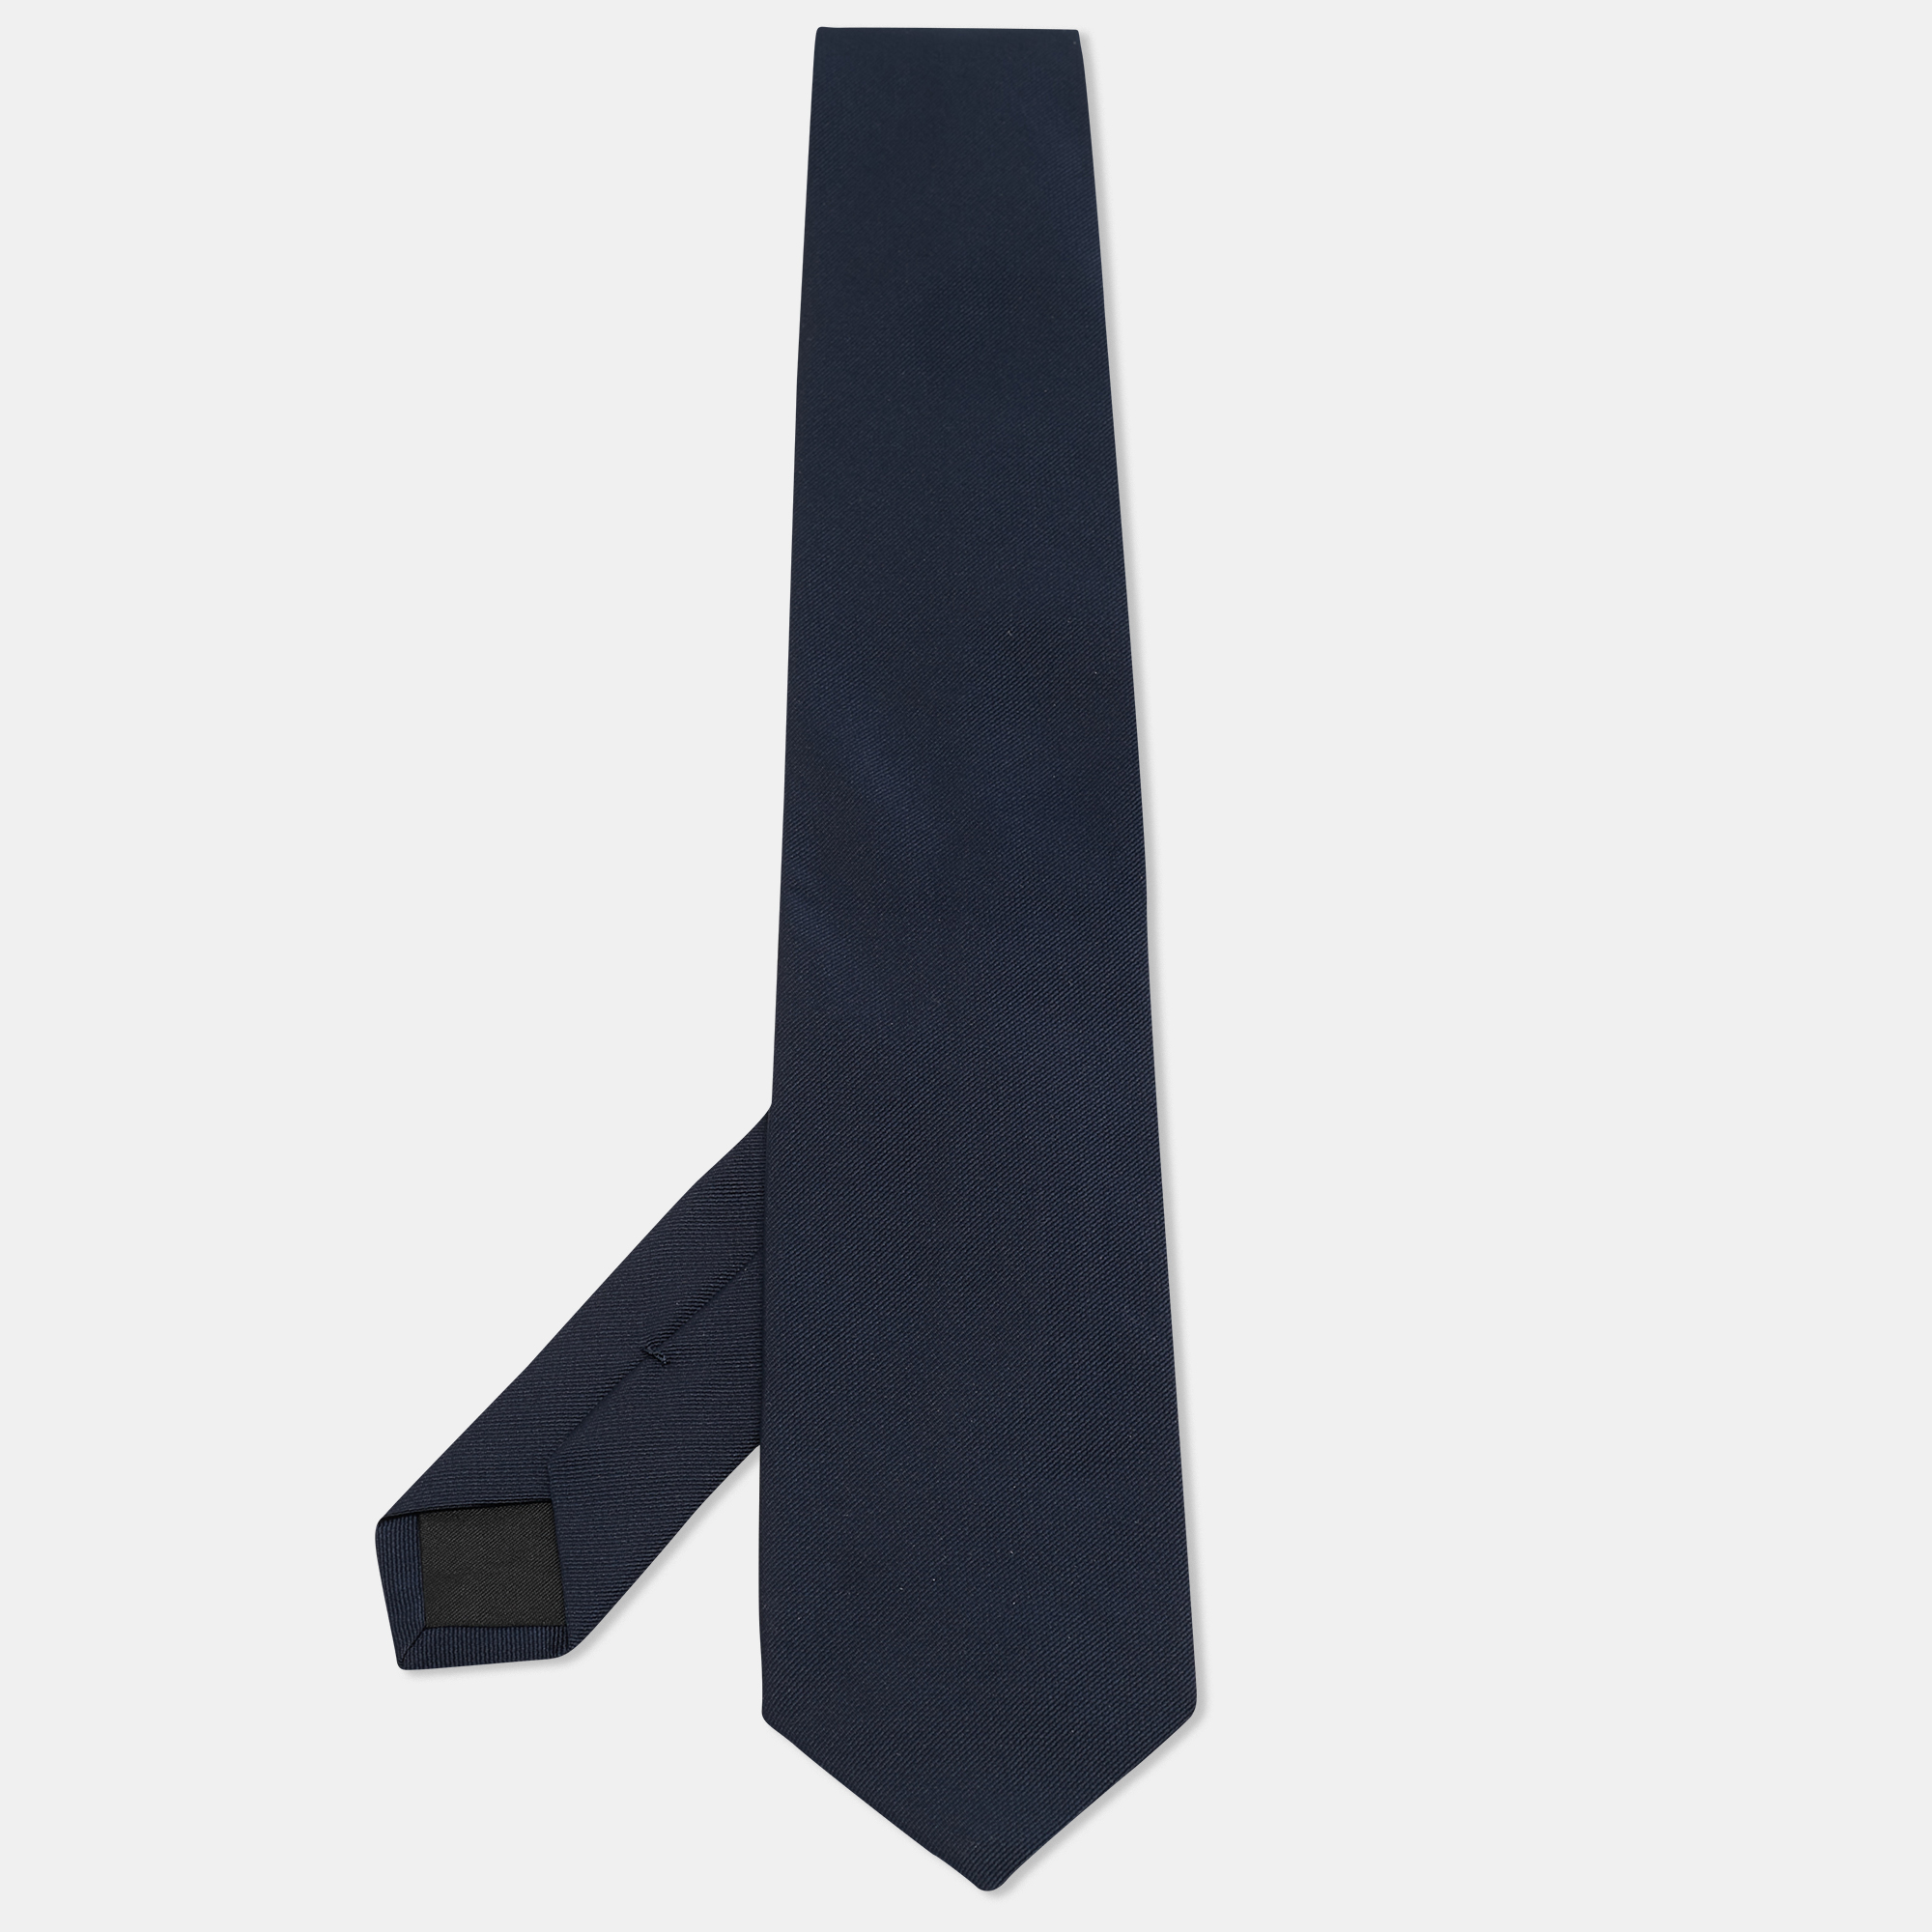 This tie is a perfect formal accessory that has a sharp and modern appeal. Made from luxurious materials it features intricate patterns and the brand label is neatly stitched at the back. It is sure to add oodles of style to your blazers.